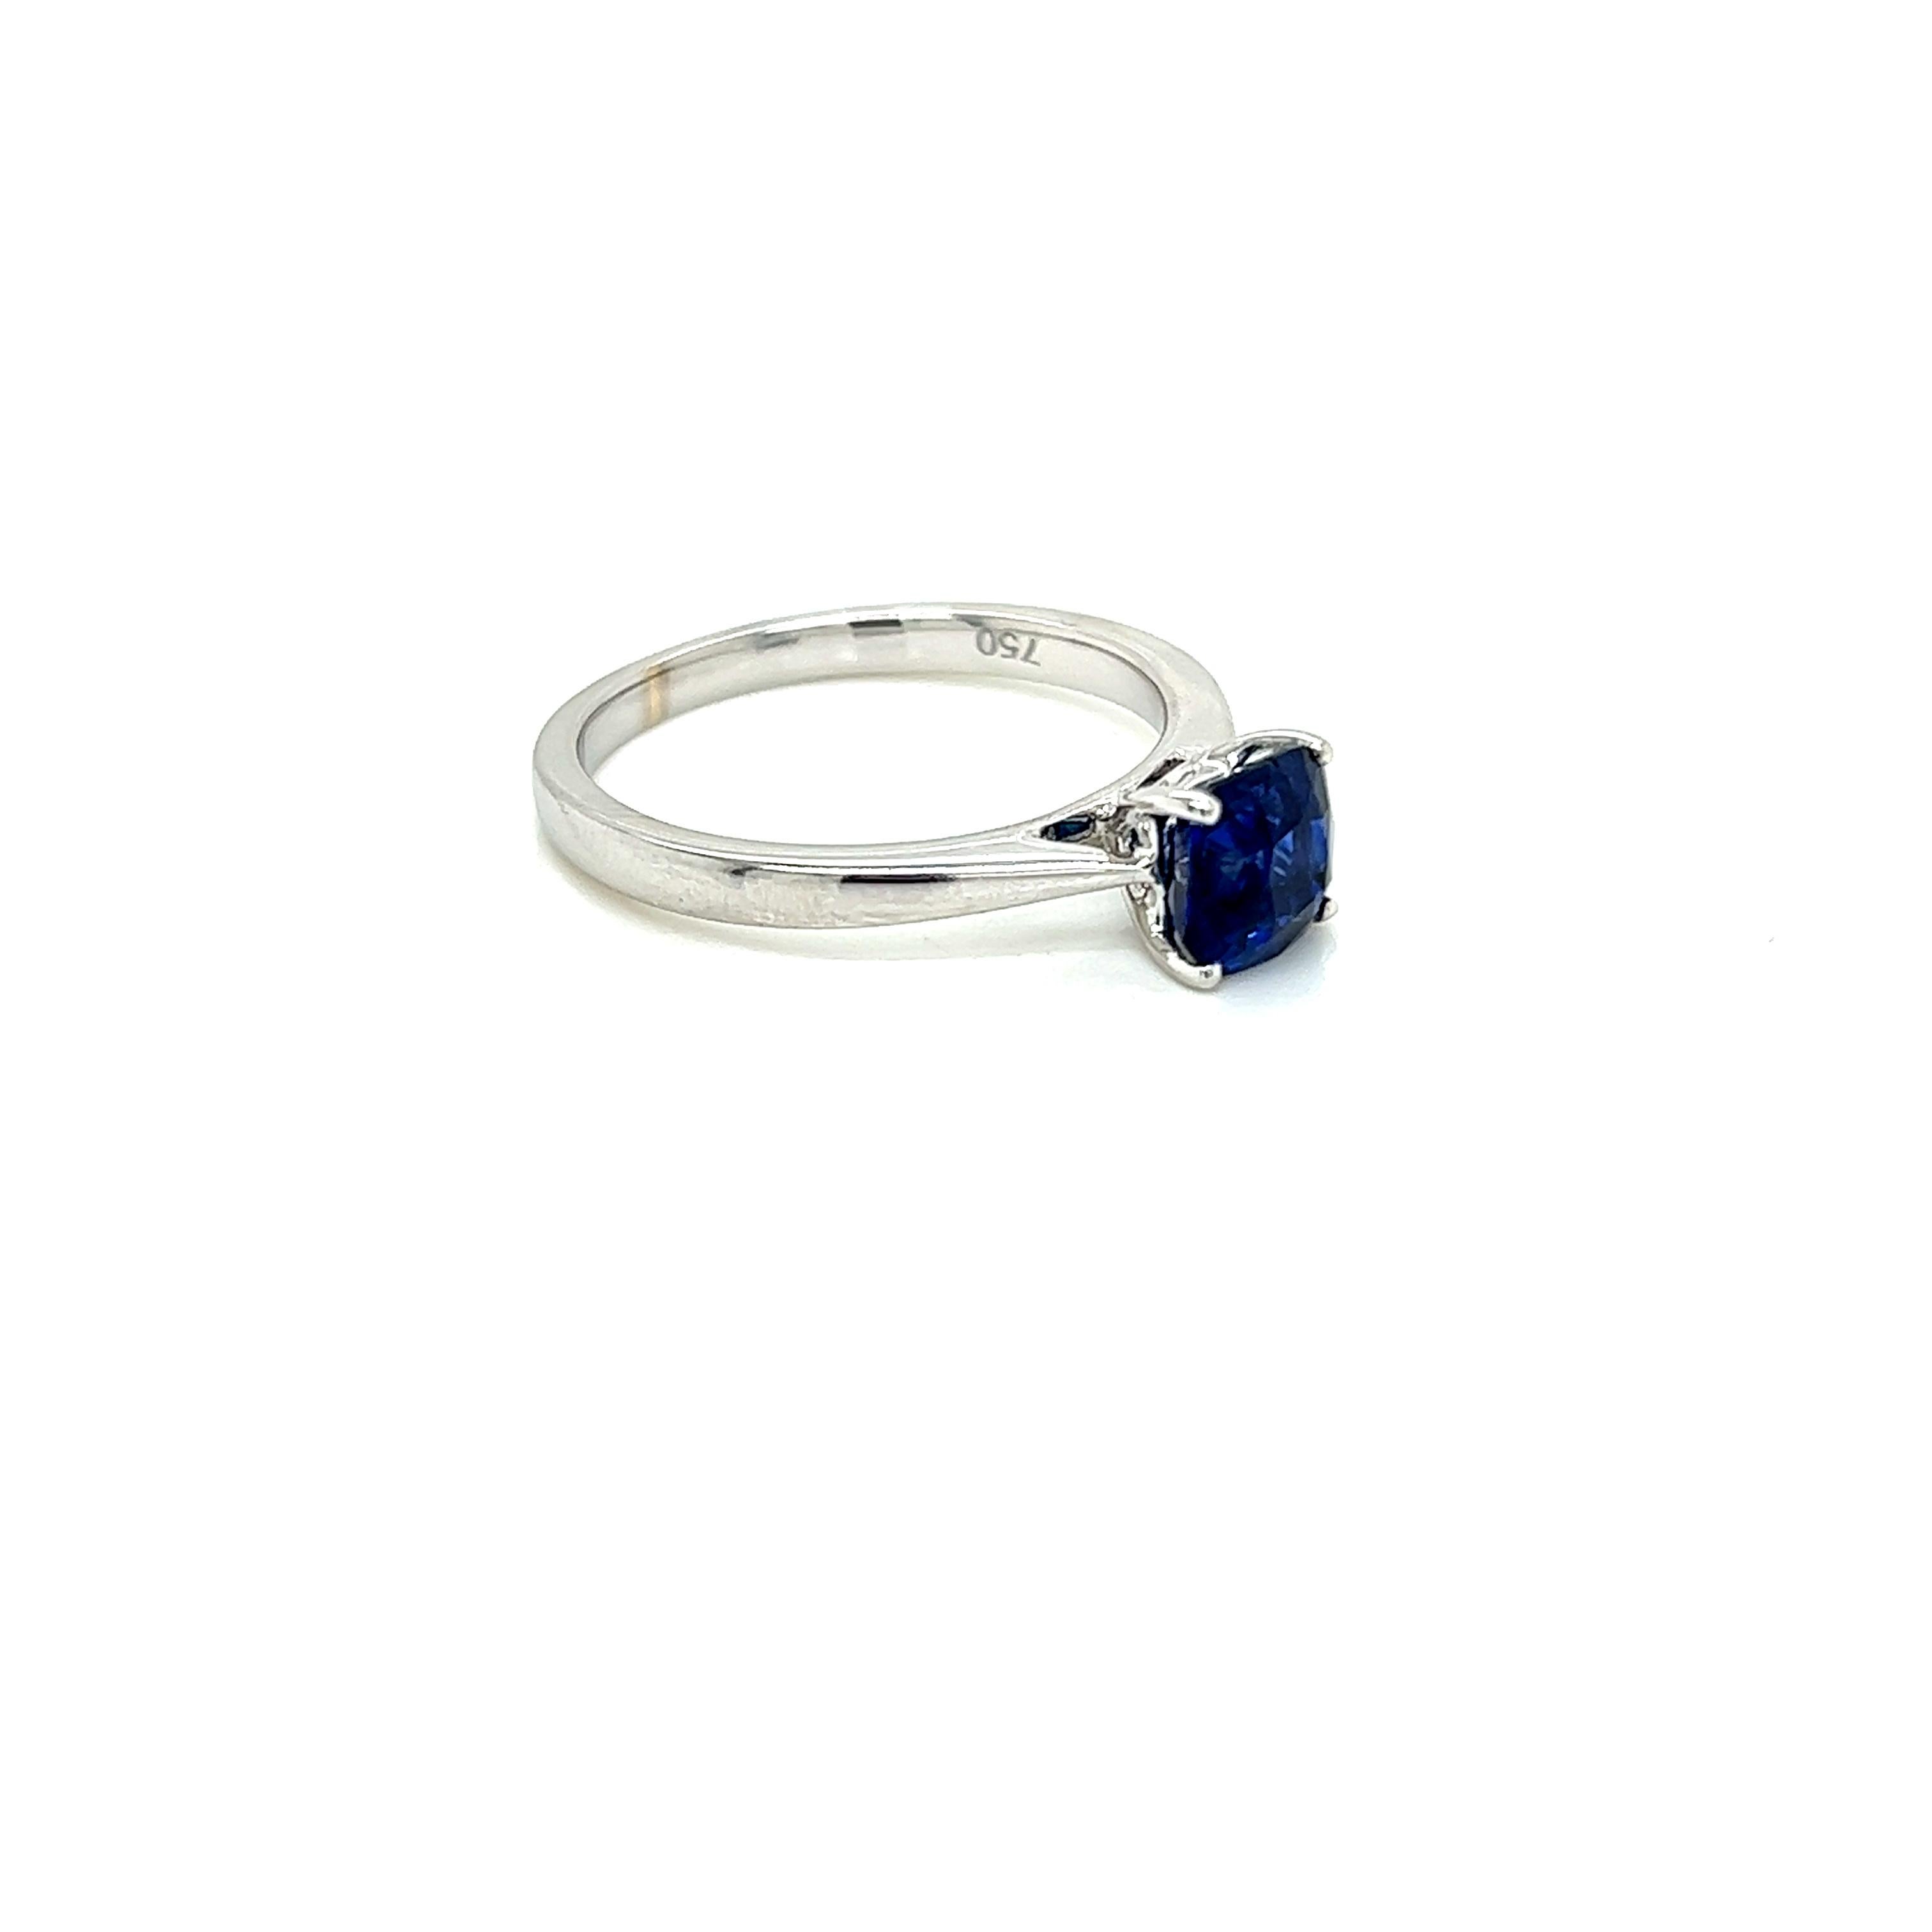 1.28 Carat Cushion cut Blue Sapphire Solitaire Ring in 18K White Gold In New Condition For Sale In London, GB